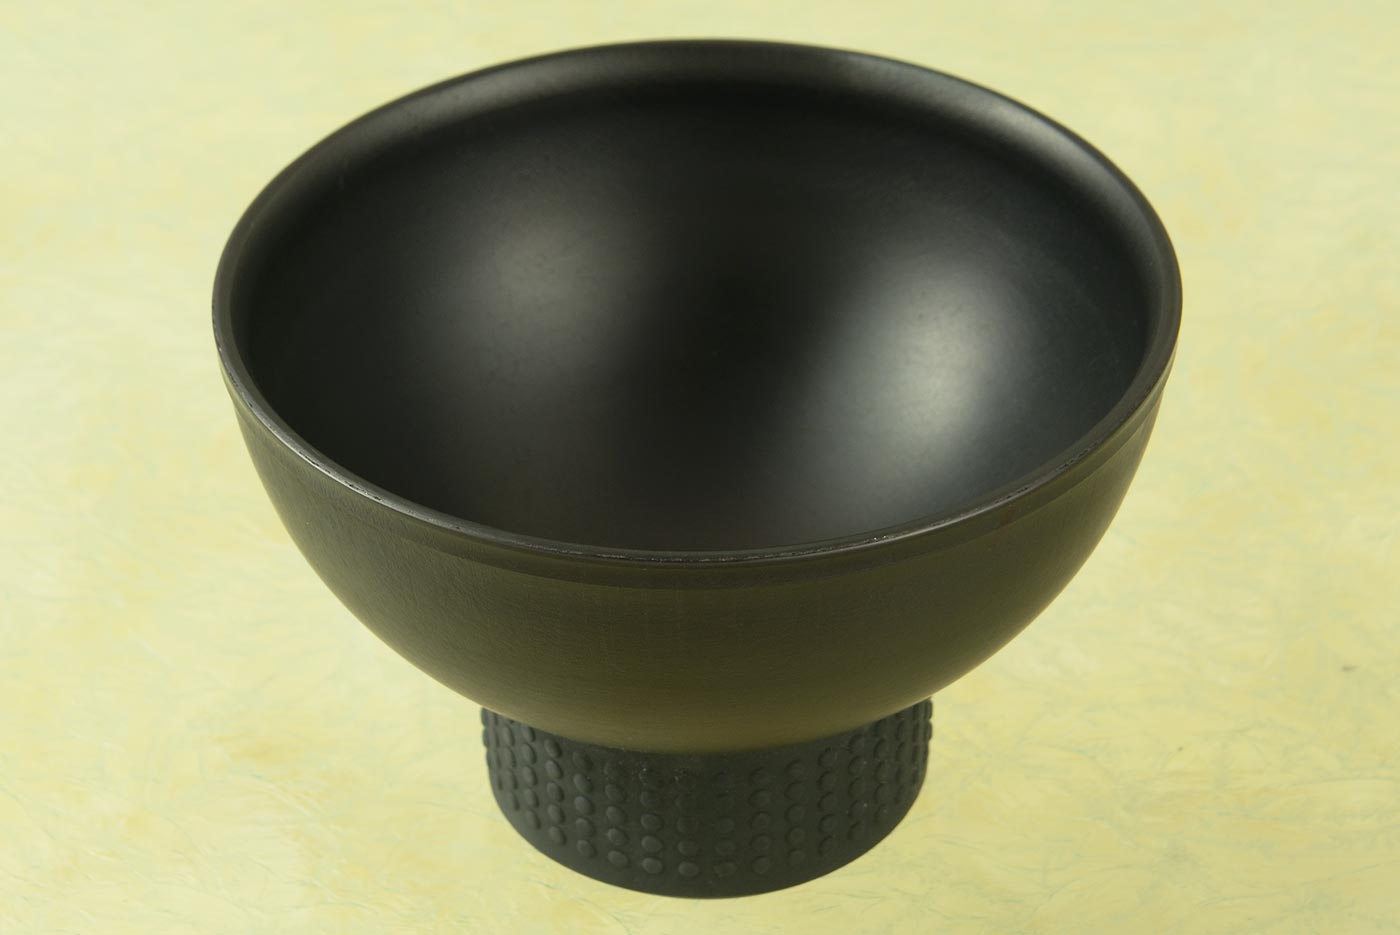 Shave Bowl -- Anodized Aluminum with Rubber Base